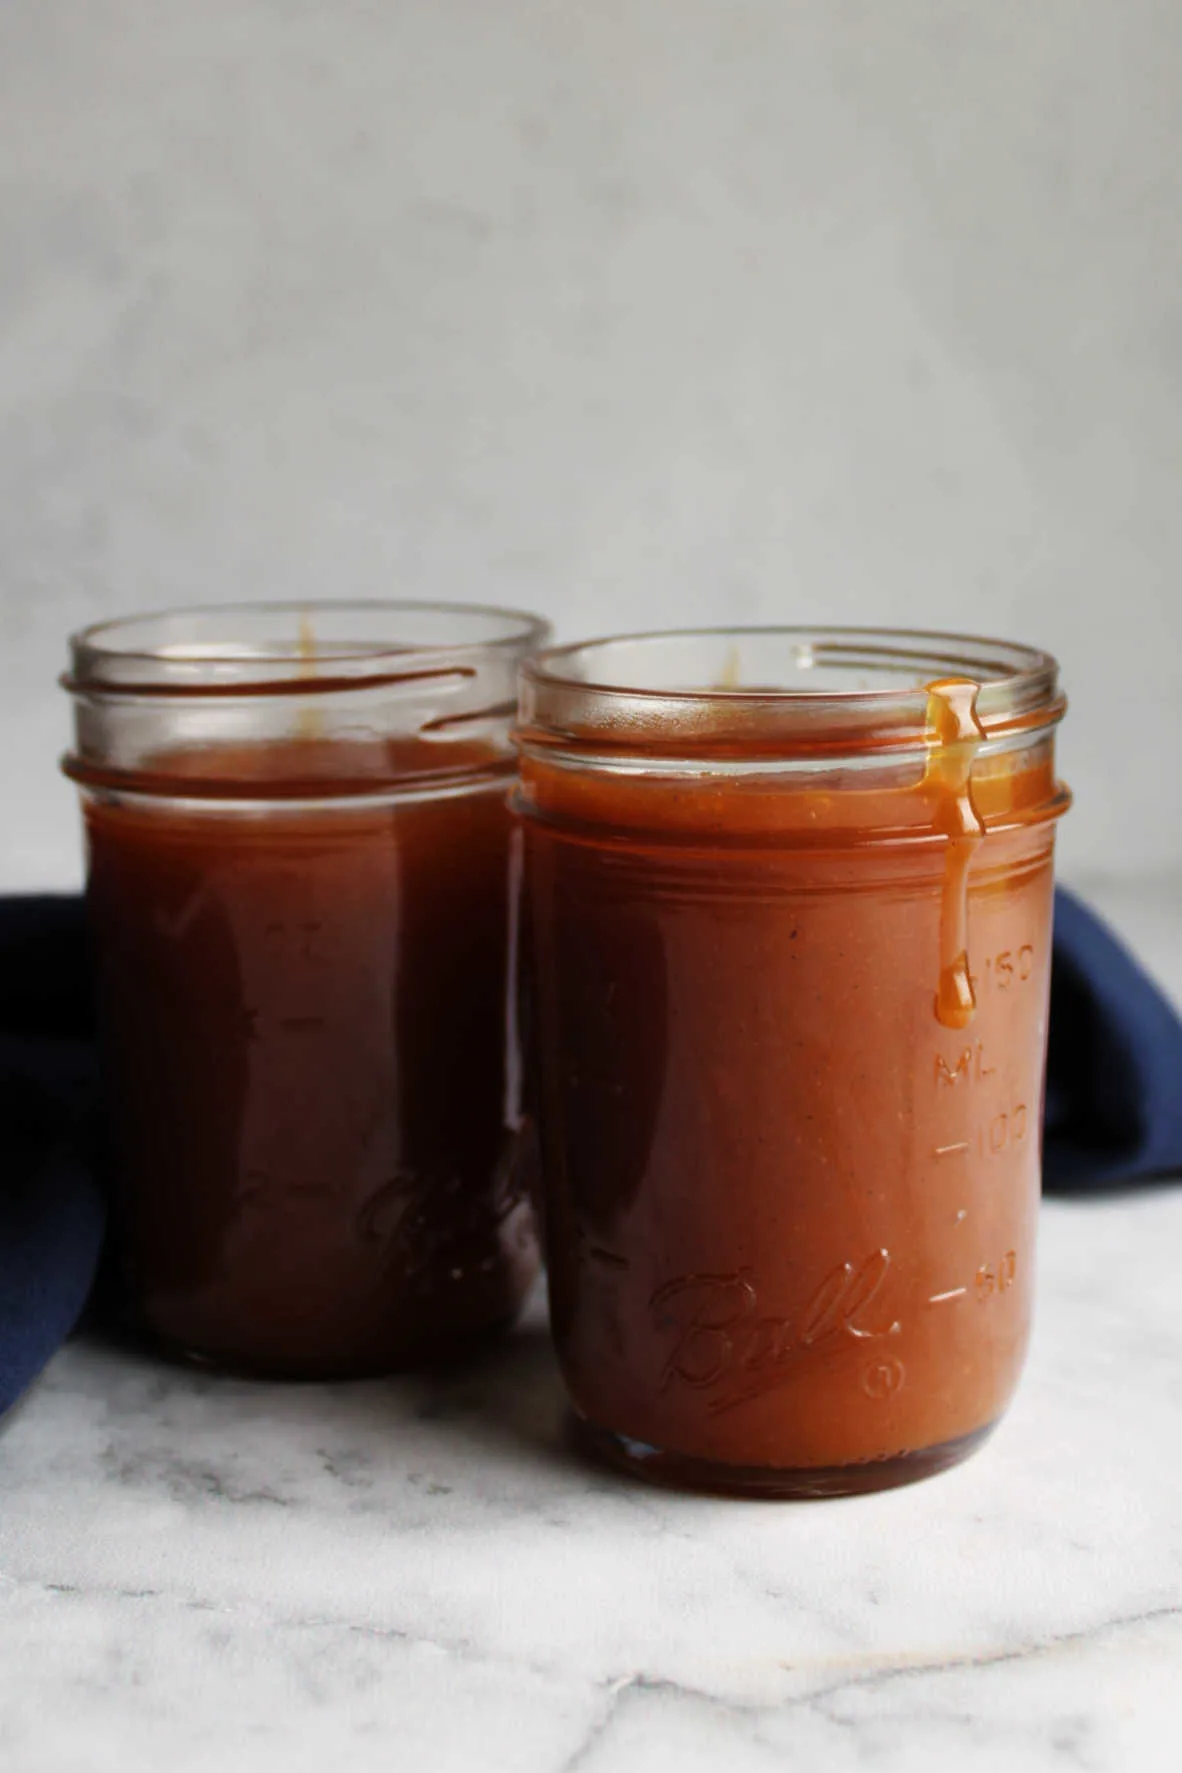 Jars of hot freshly made dulce de leche, ready to cool.